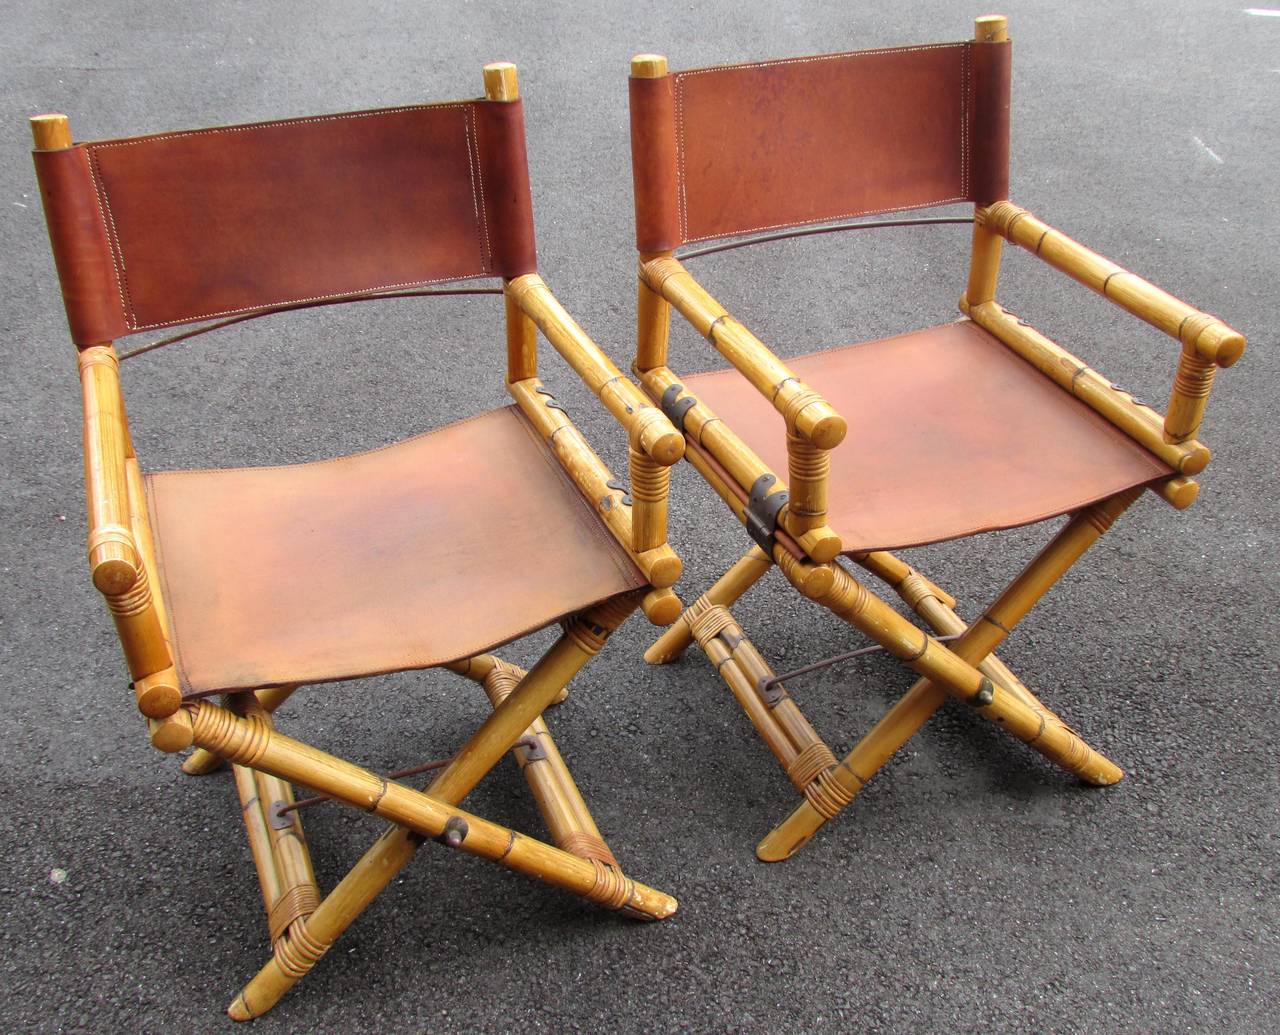 Stylish pair of director chairs made with bamboo frame and leather seat and back with brass hardware